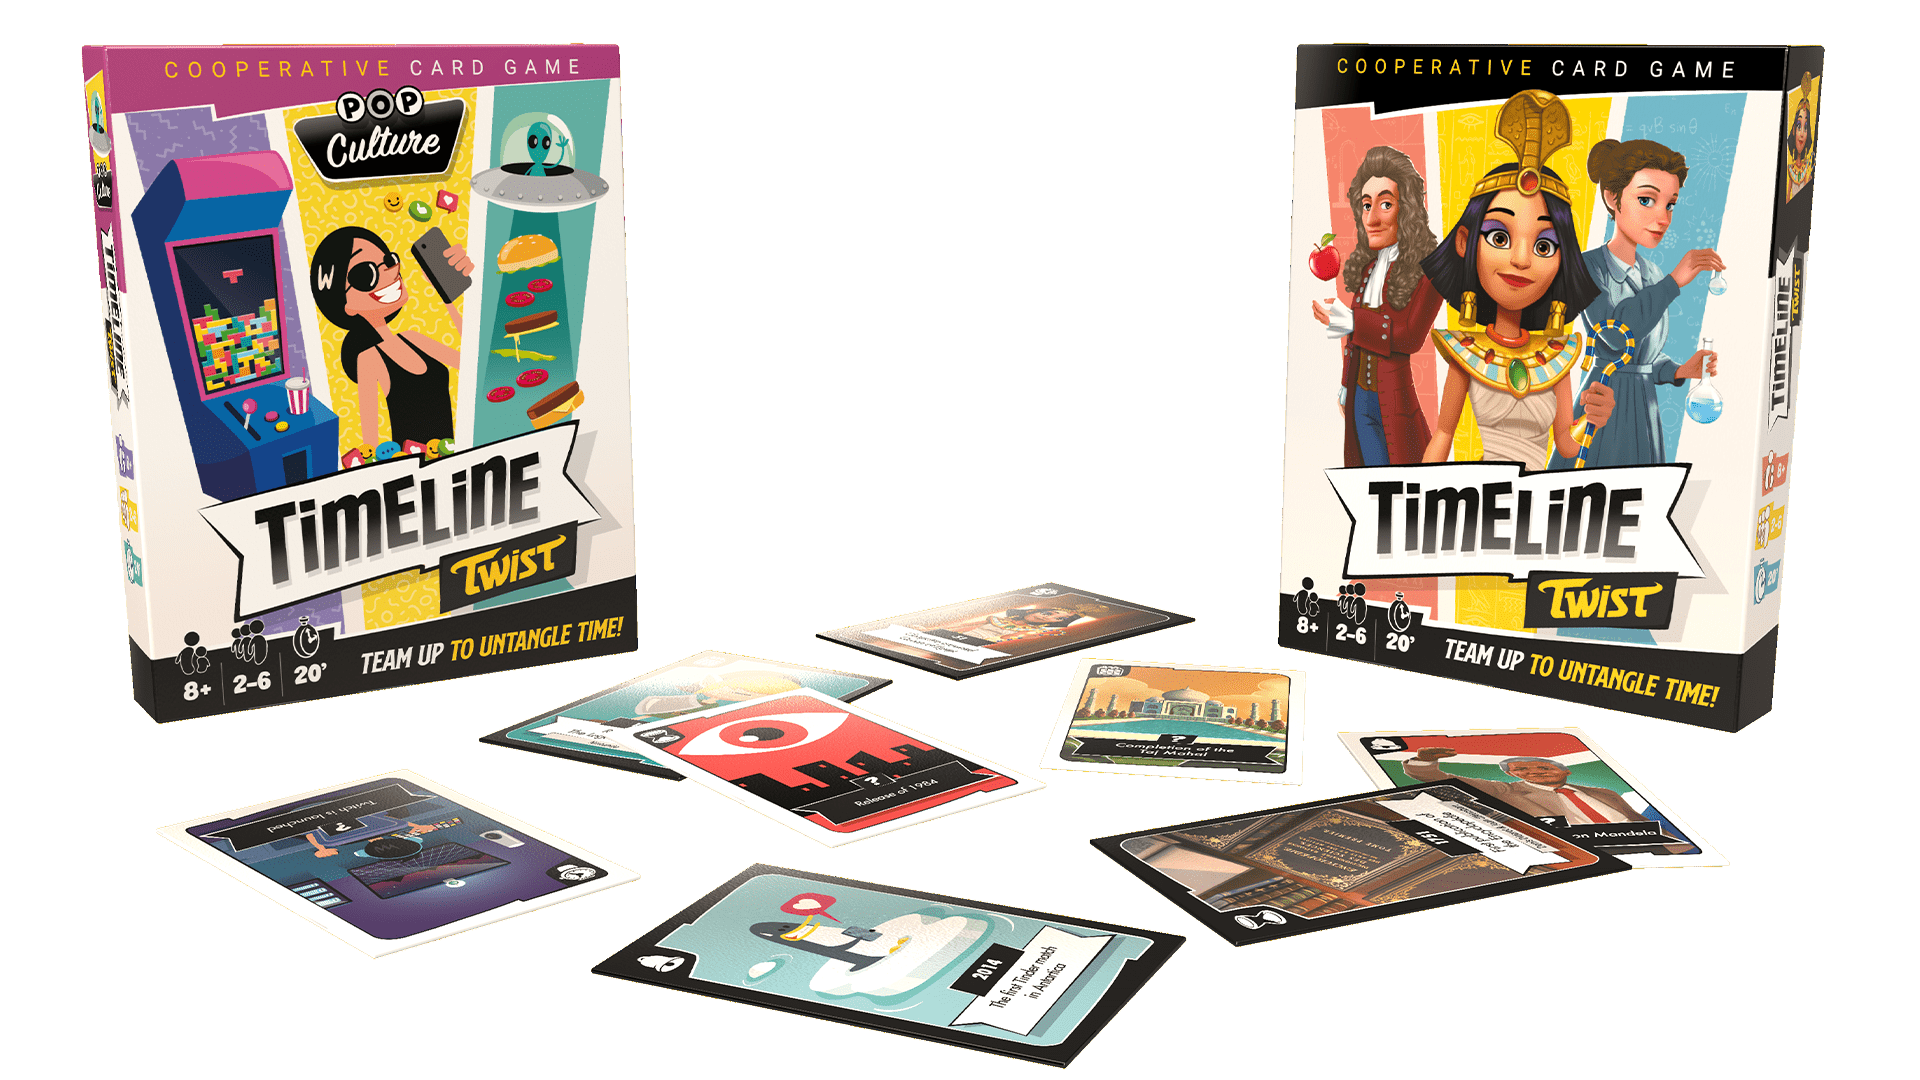 Timeline Twist box and contents